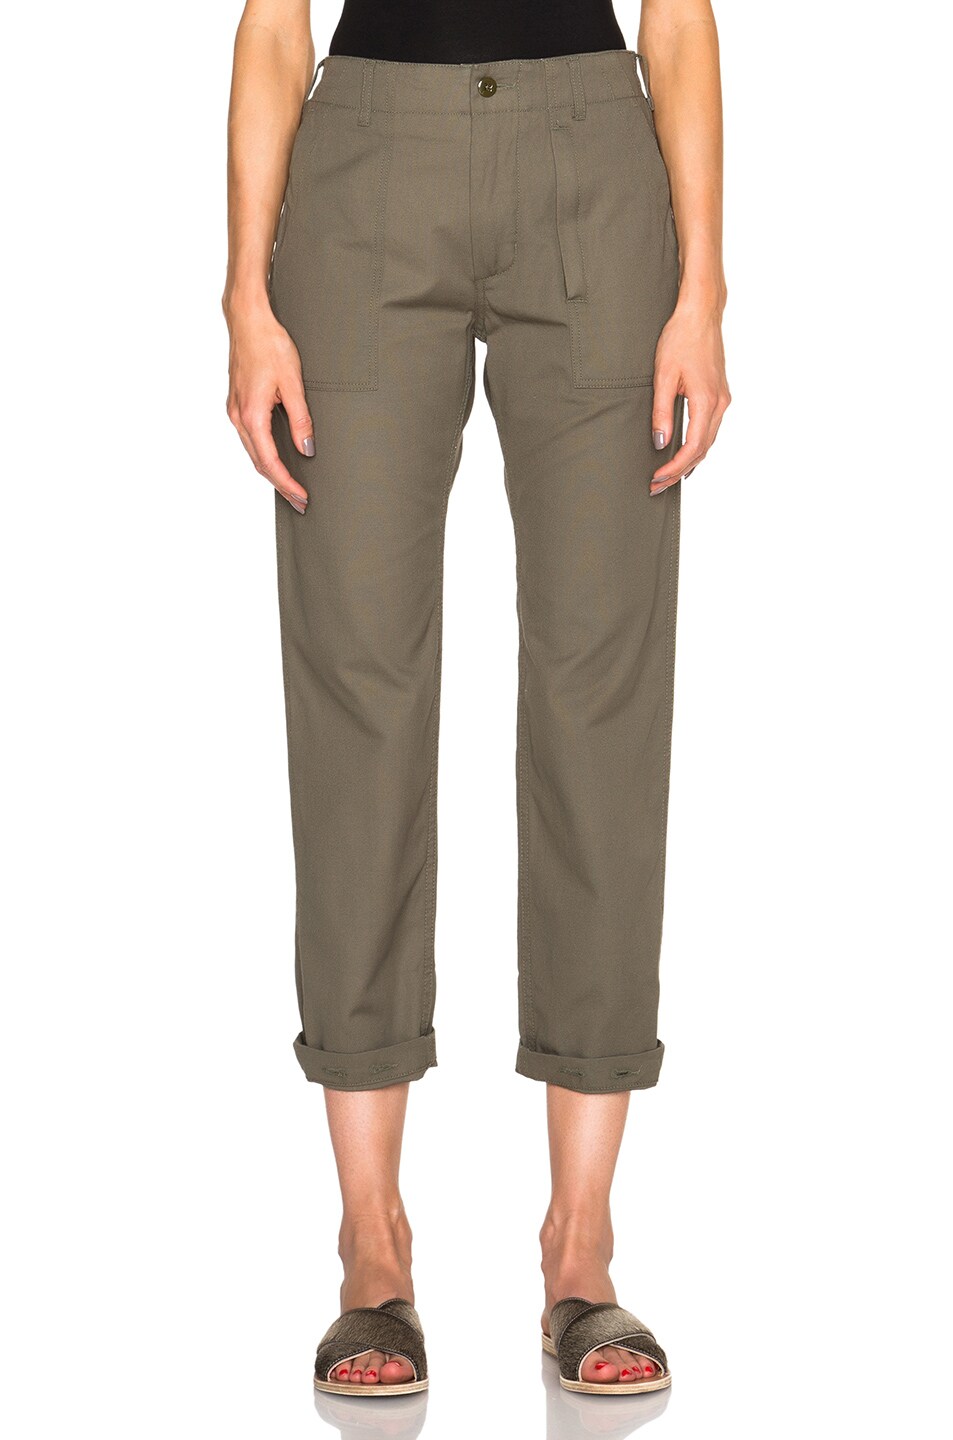 Image 1 of Engineered Garments Fatigue Outback Canvas Pants in Olive